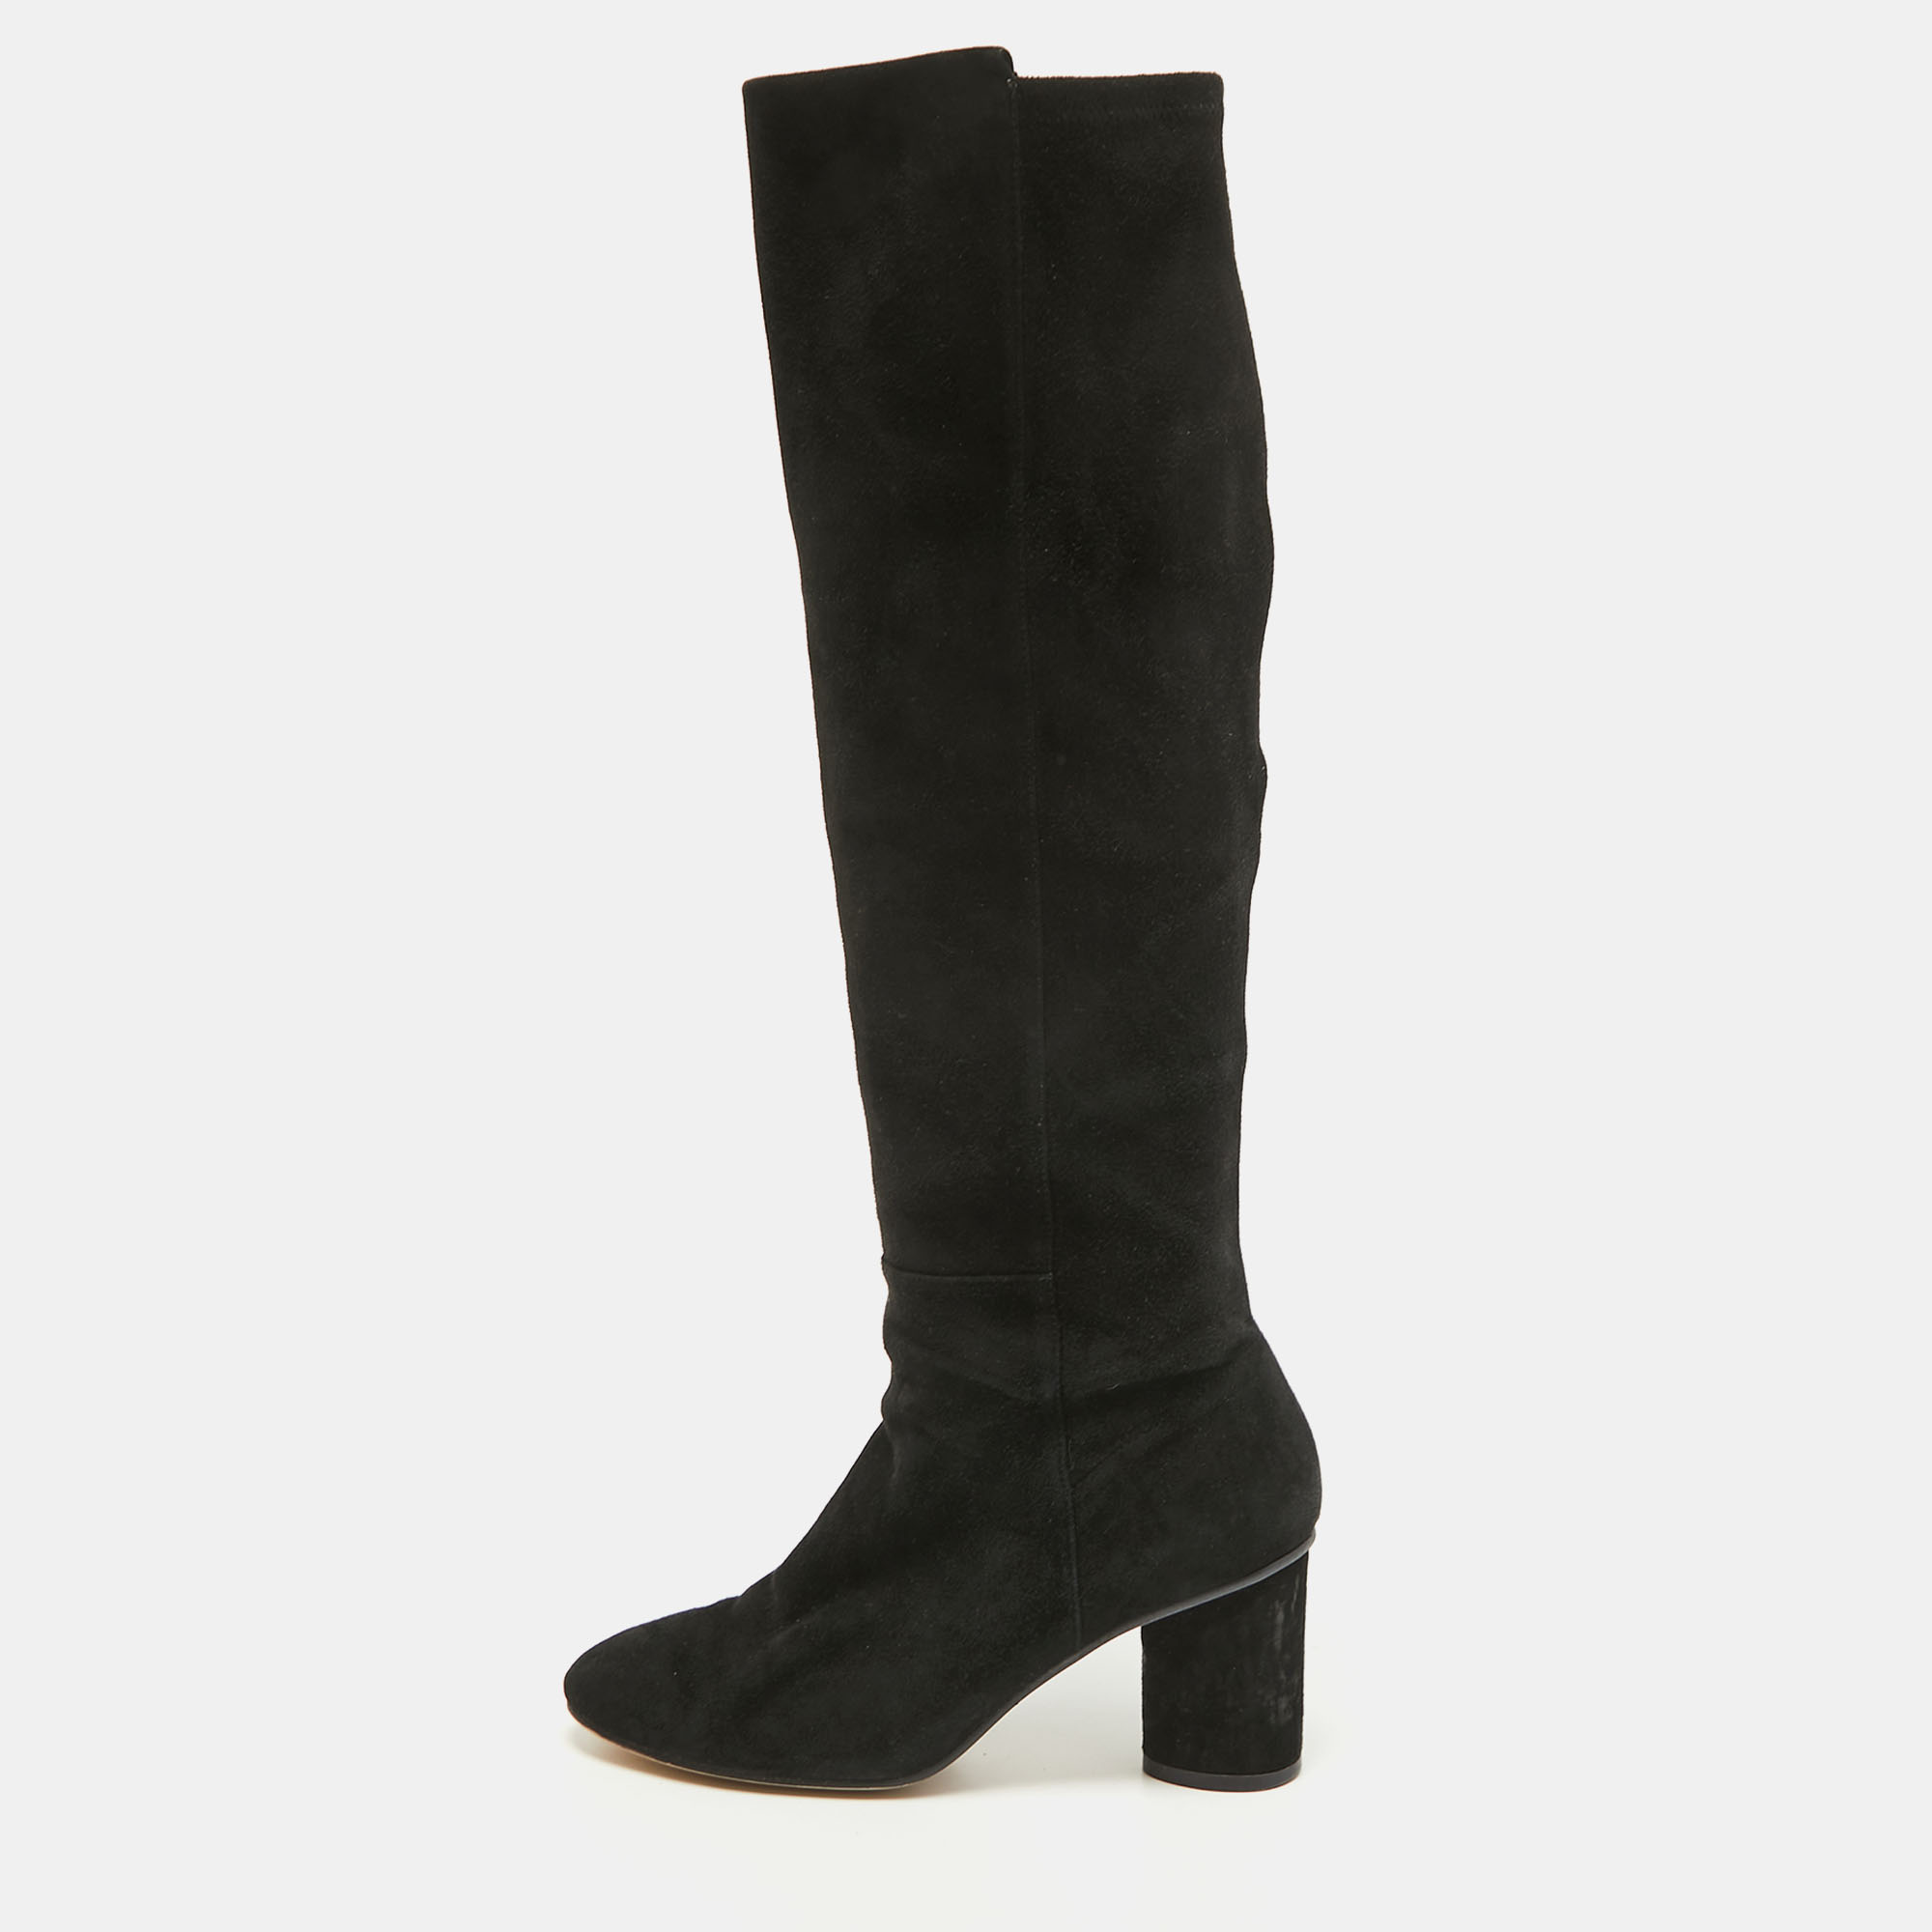 Pre-owned Stuart Weitzman Black Suede Knee Length Boots Size 37.5